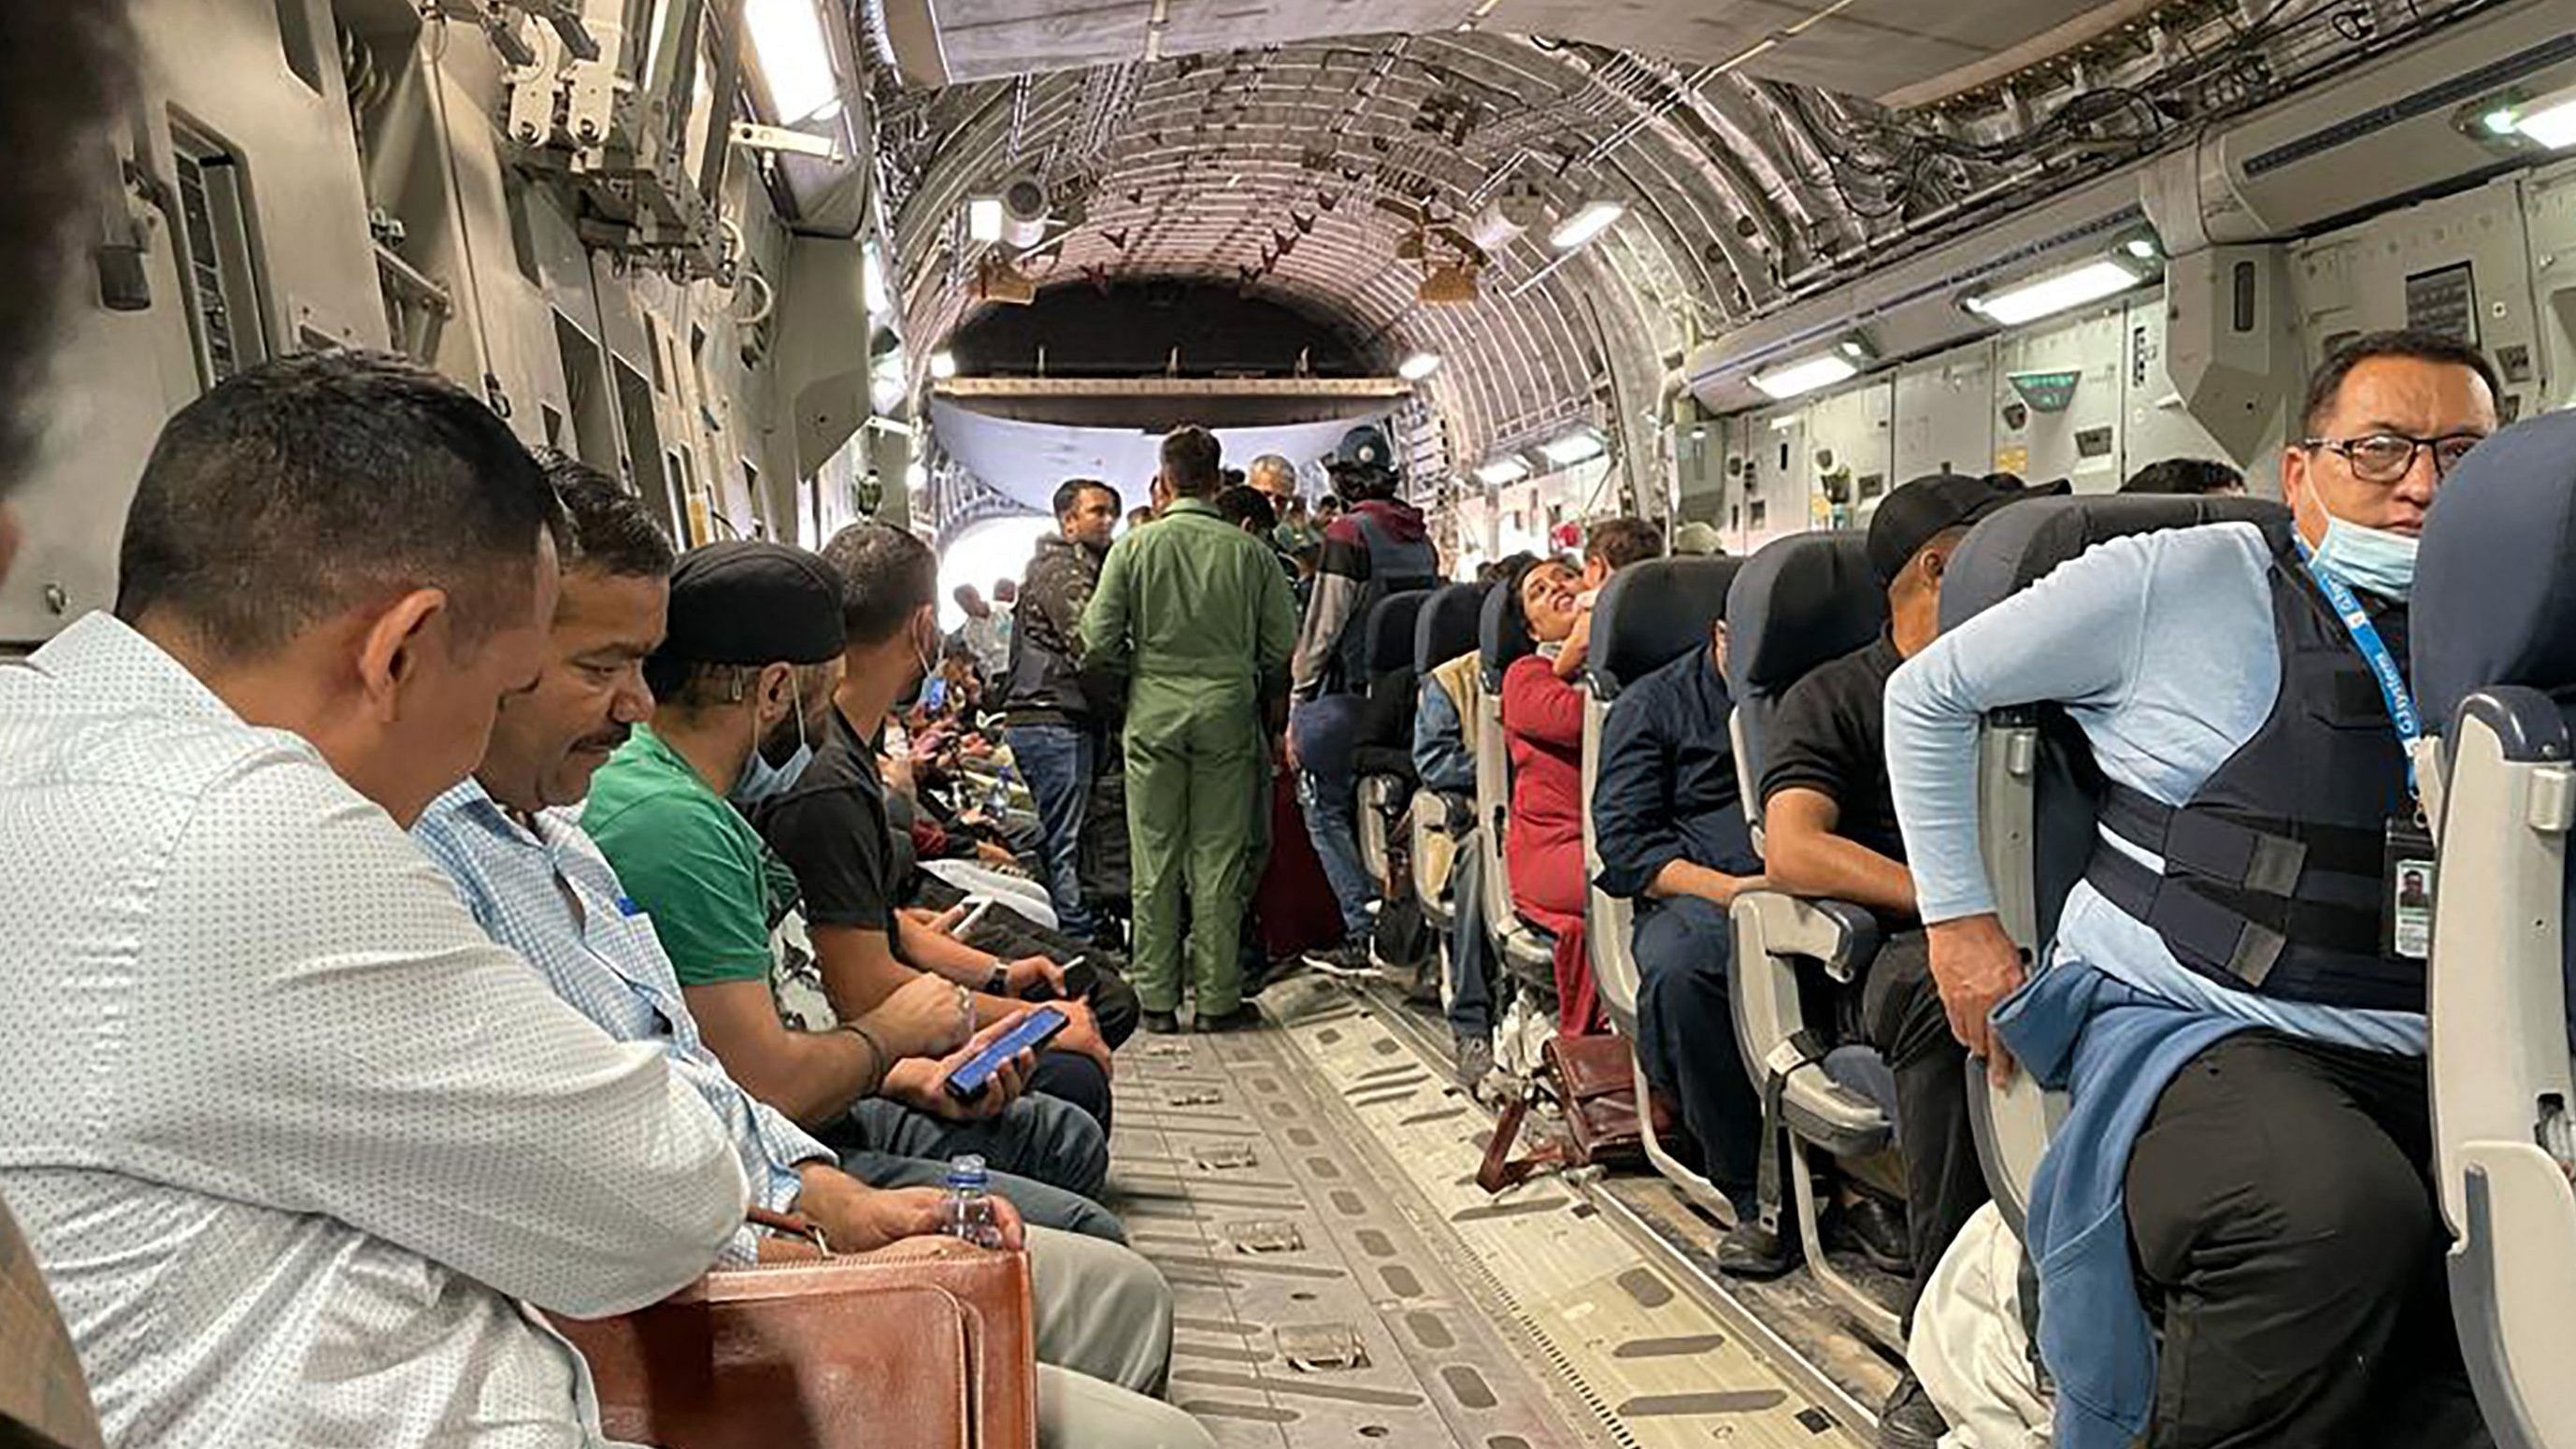 ndian Nationals sit aboard an Indian military aircraft at the airport in Kabul. Credit: AFP